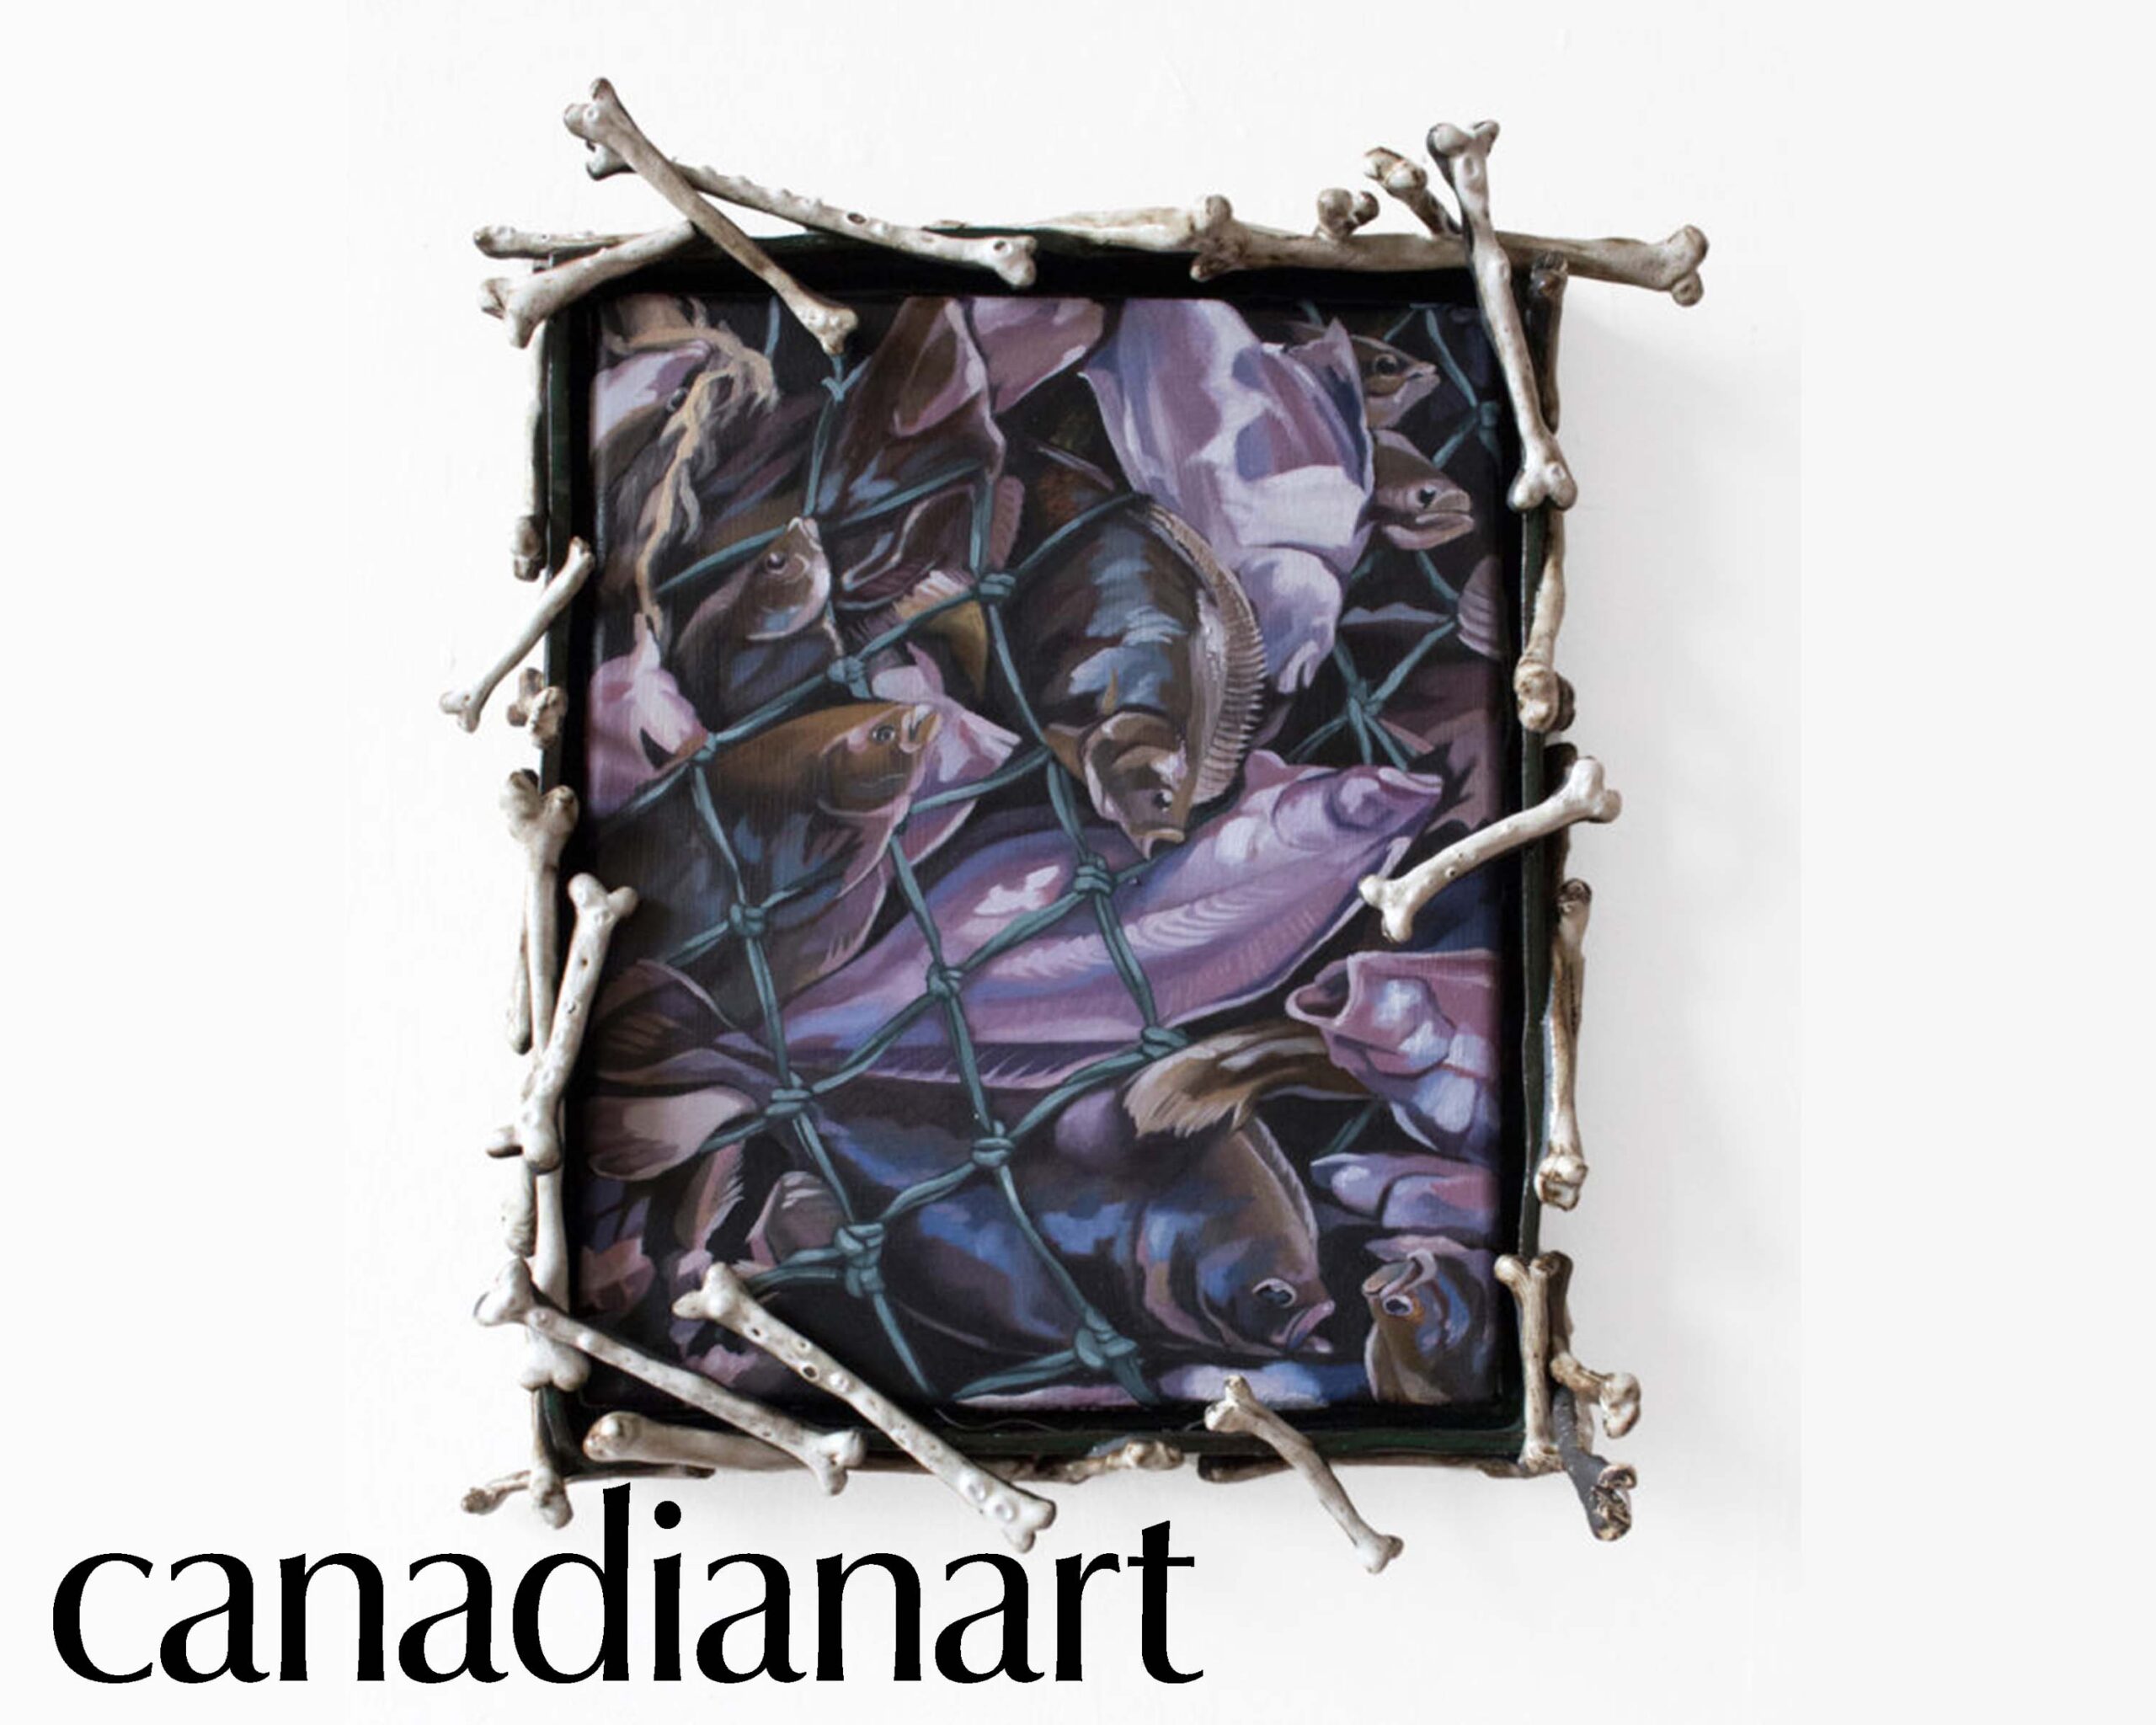 Canadian Art, 2020 | Don’t Eat the Pictures